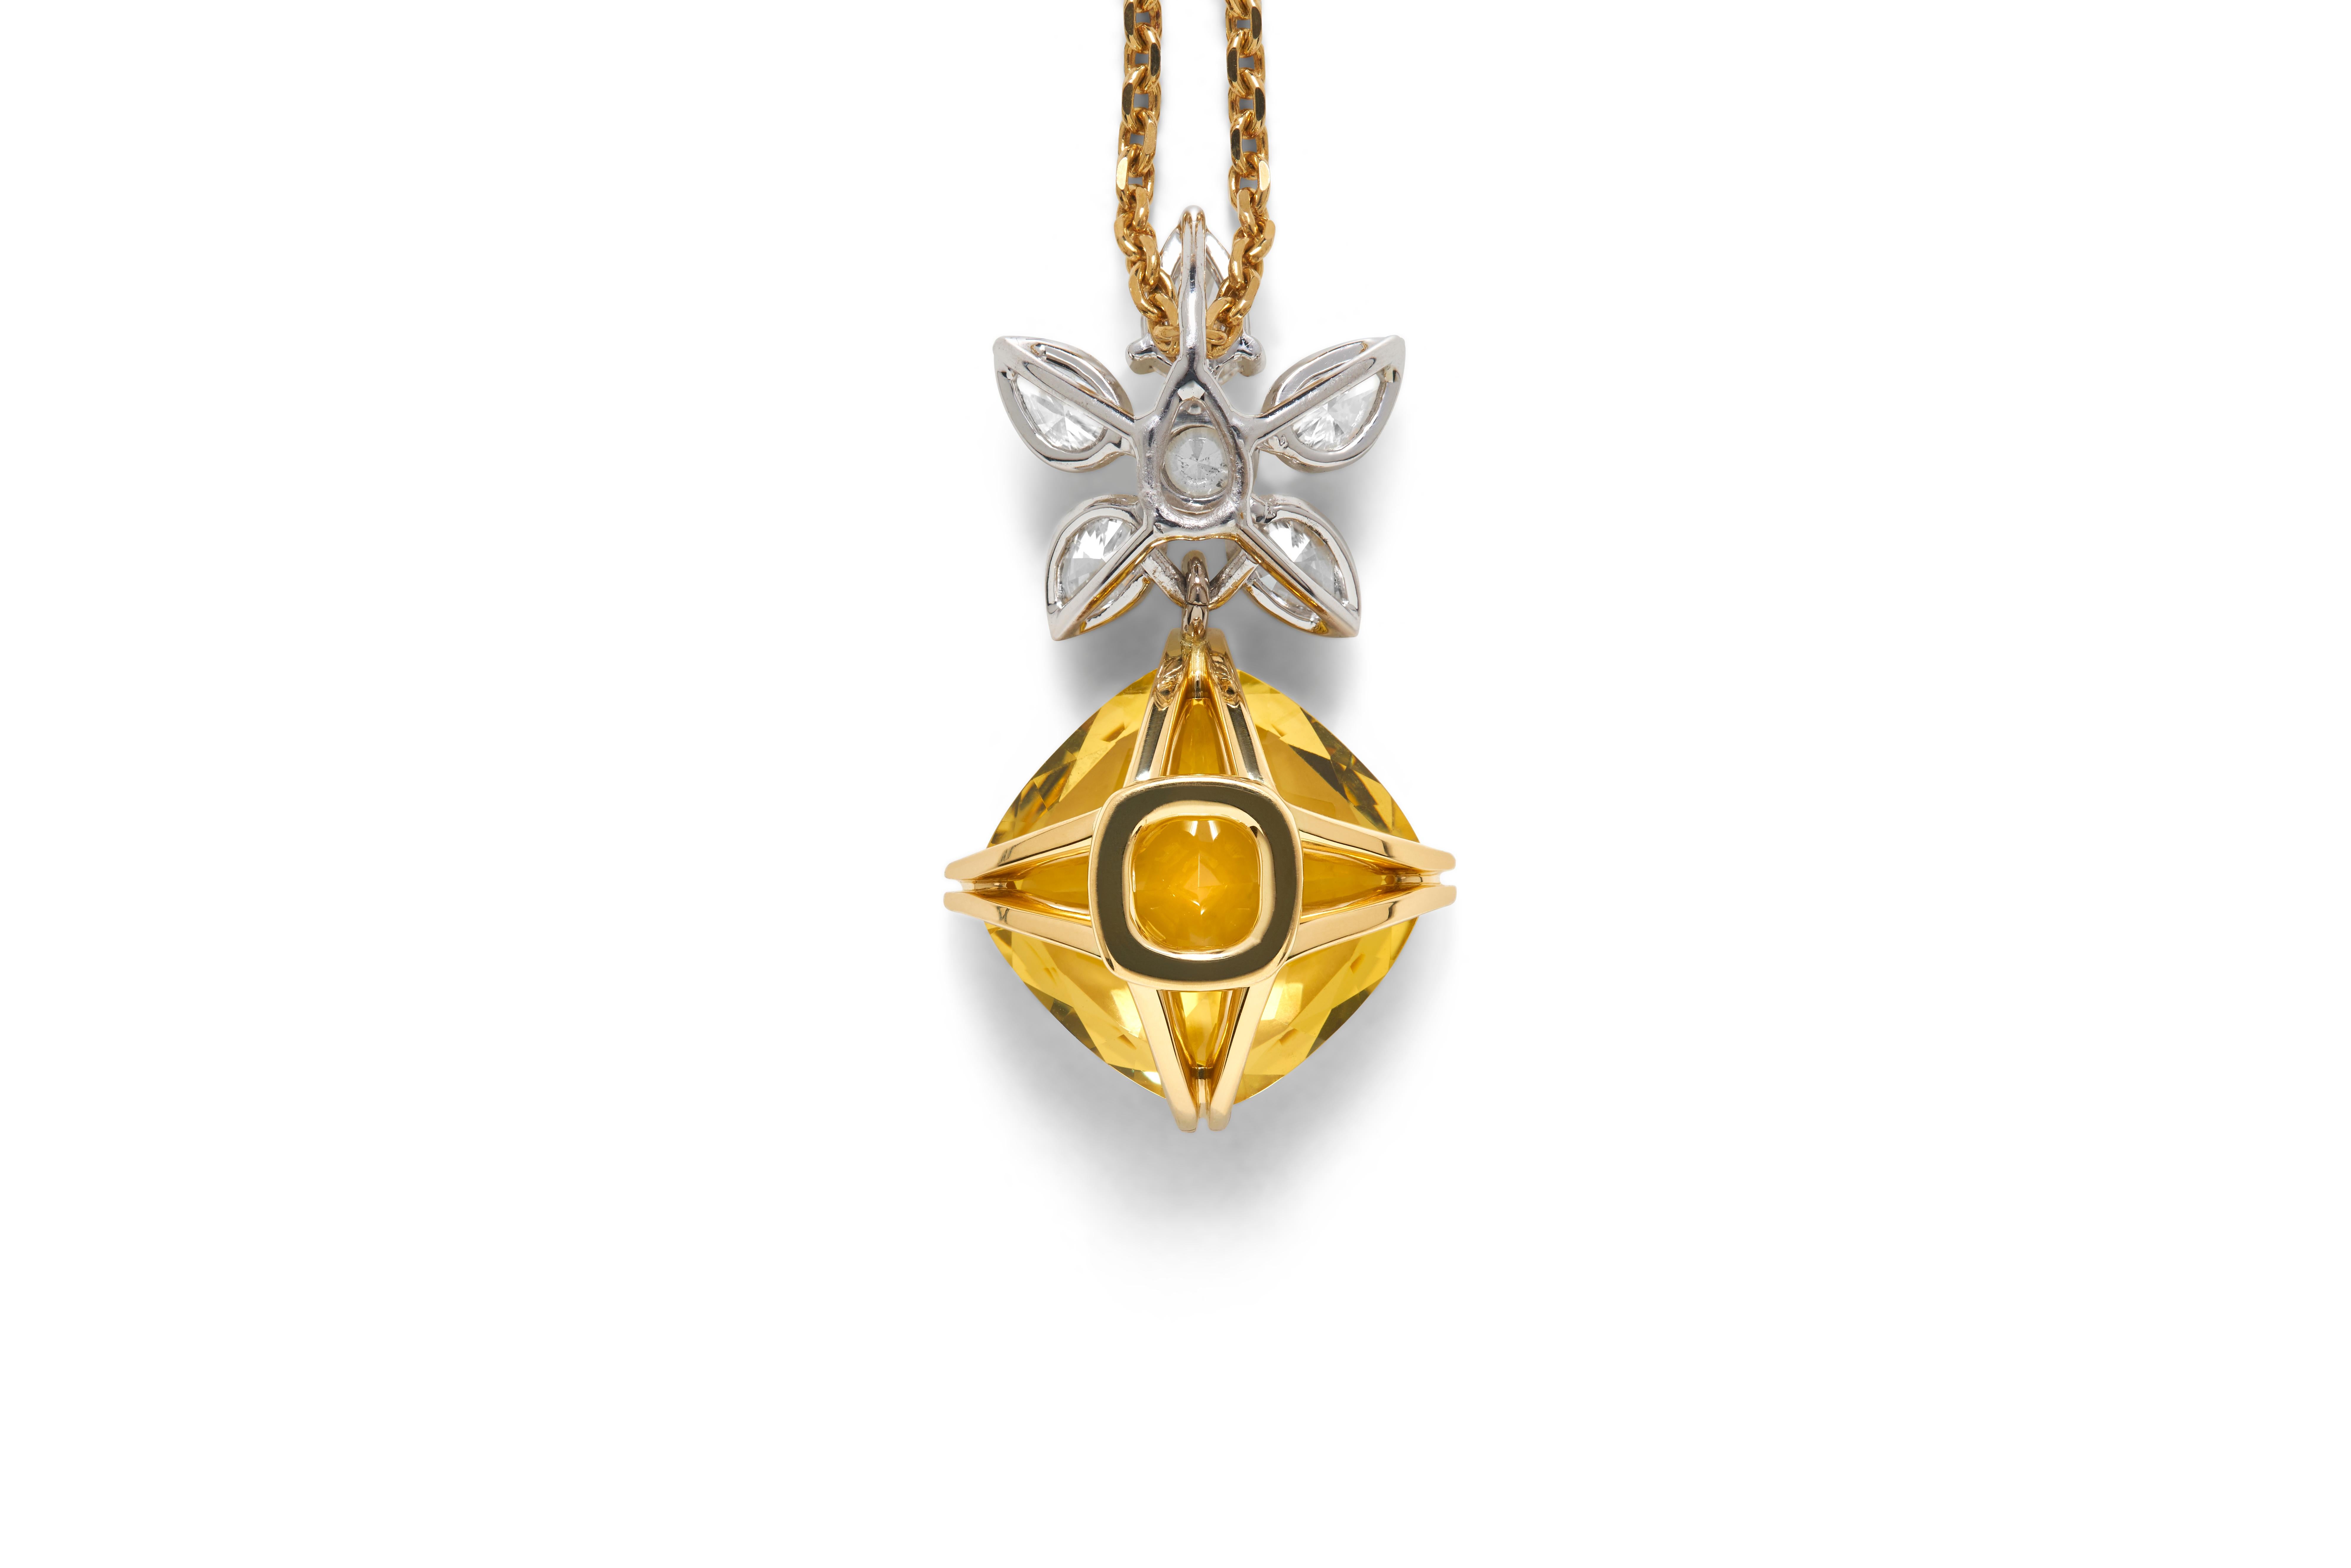 18 carat Gold Golden Beryl and White Diamond Pendant Necklace

Blossom Collection Golden Beryl and Diamond Pendant. The Blossom Collection gemstones are a uniquely designed cushion cut, featuring a high table to emulate the antique Georgian style